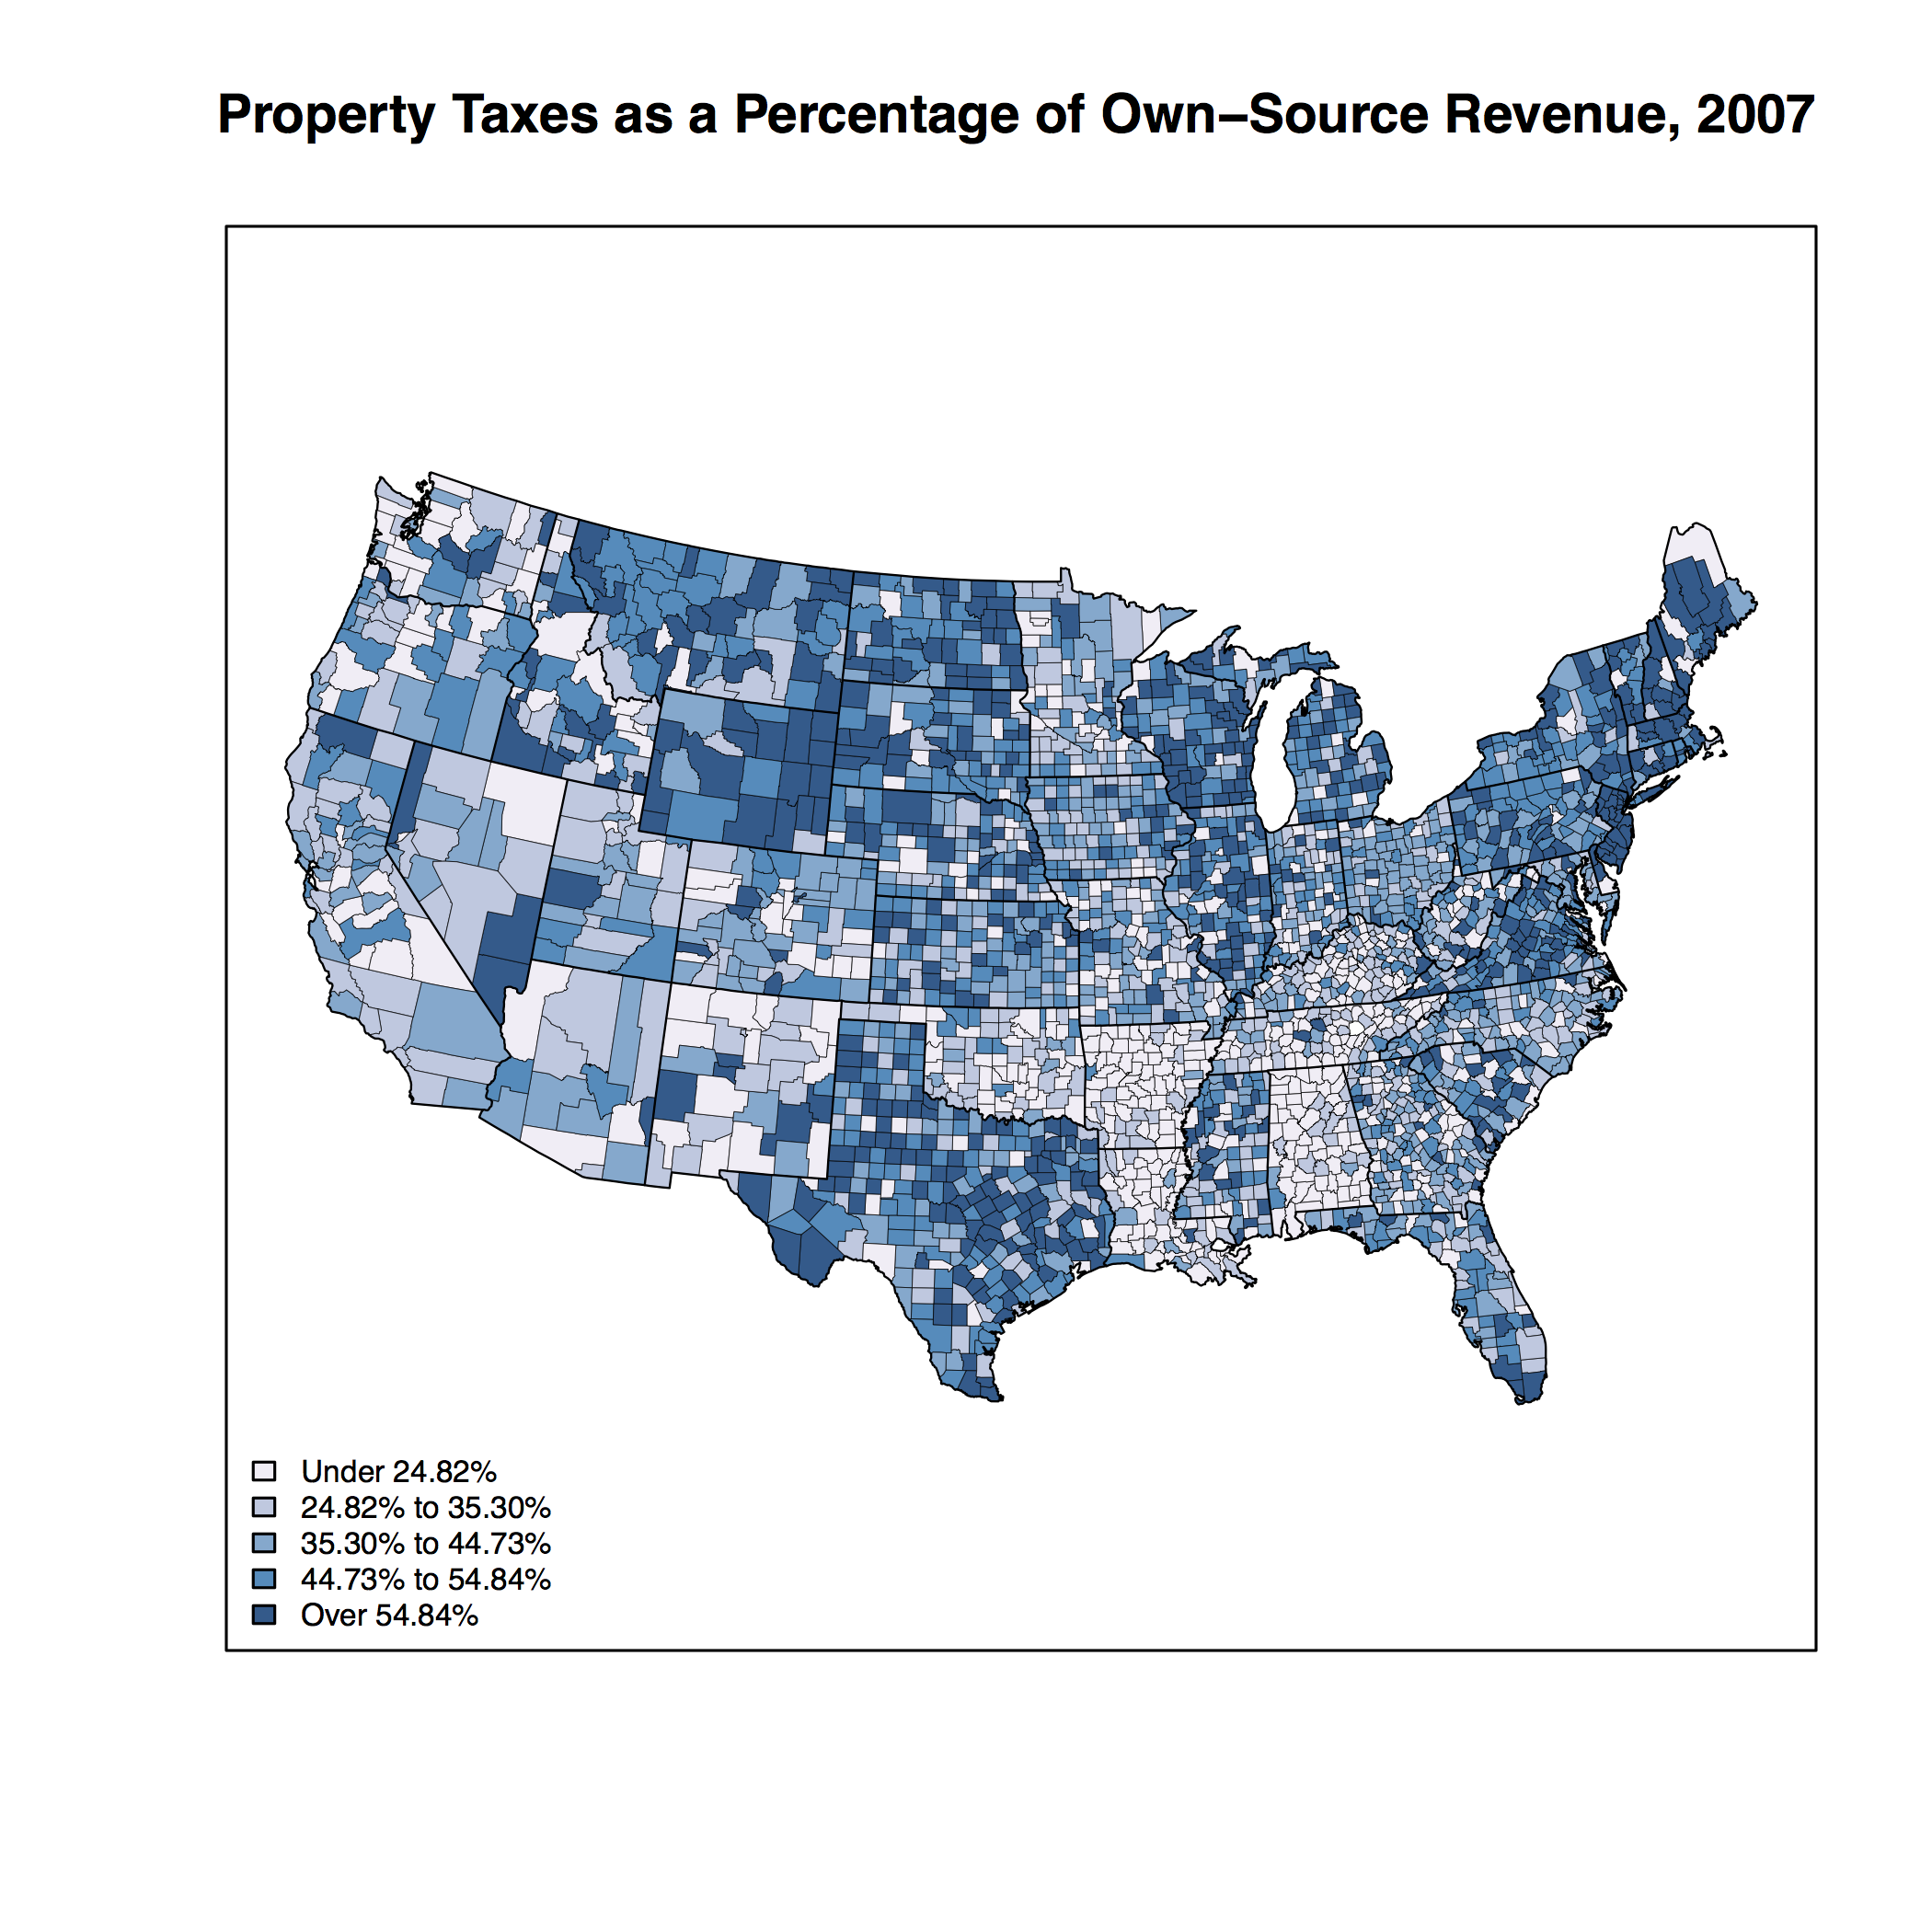 Property Tax Reliance in U.S. County Areas